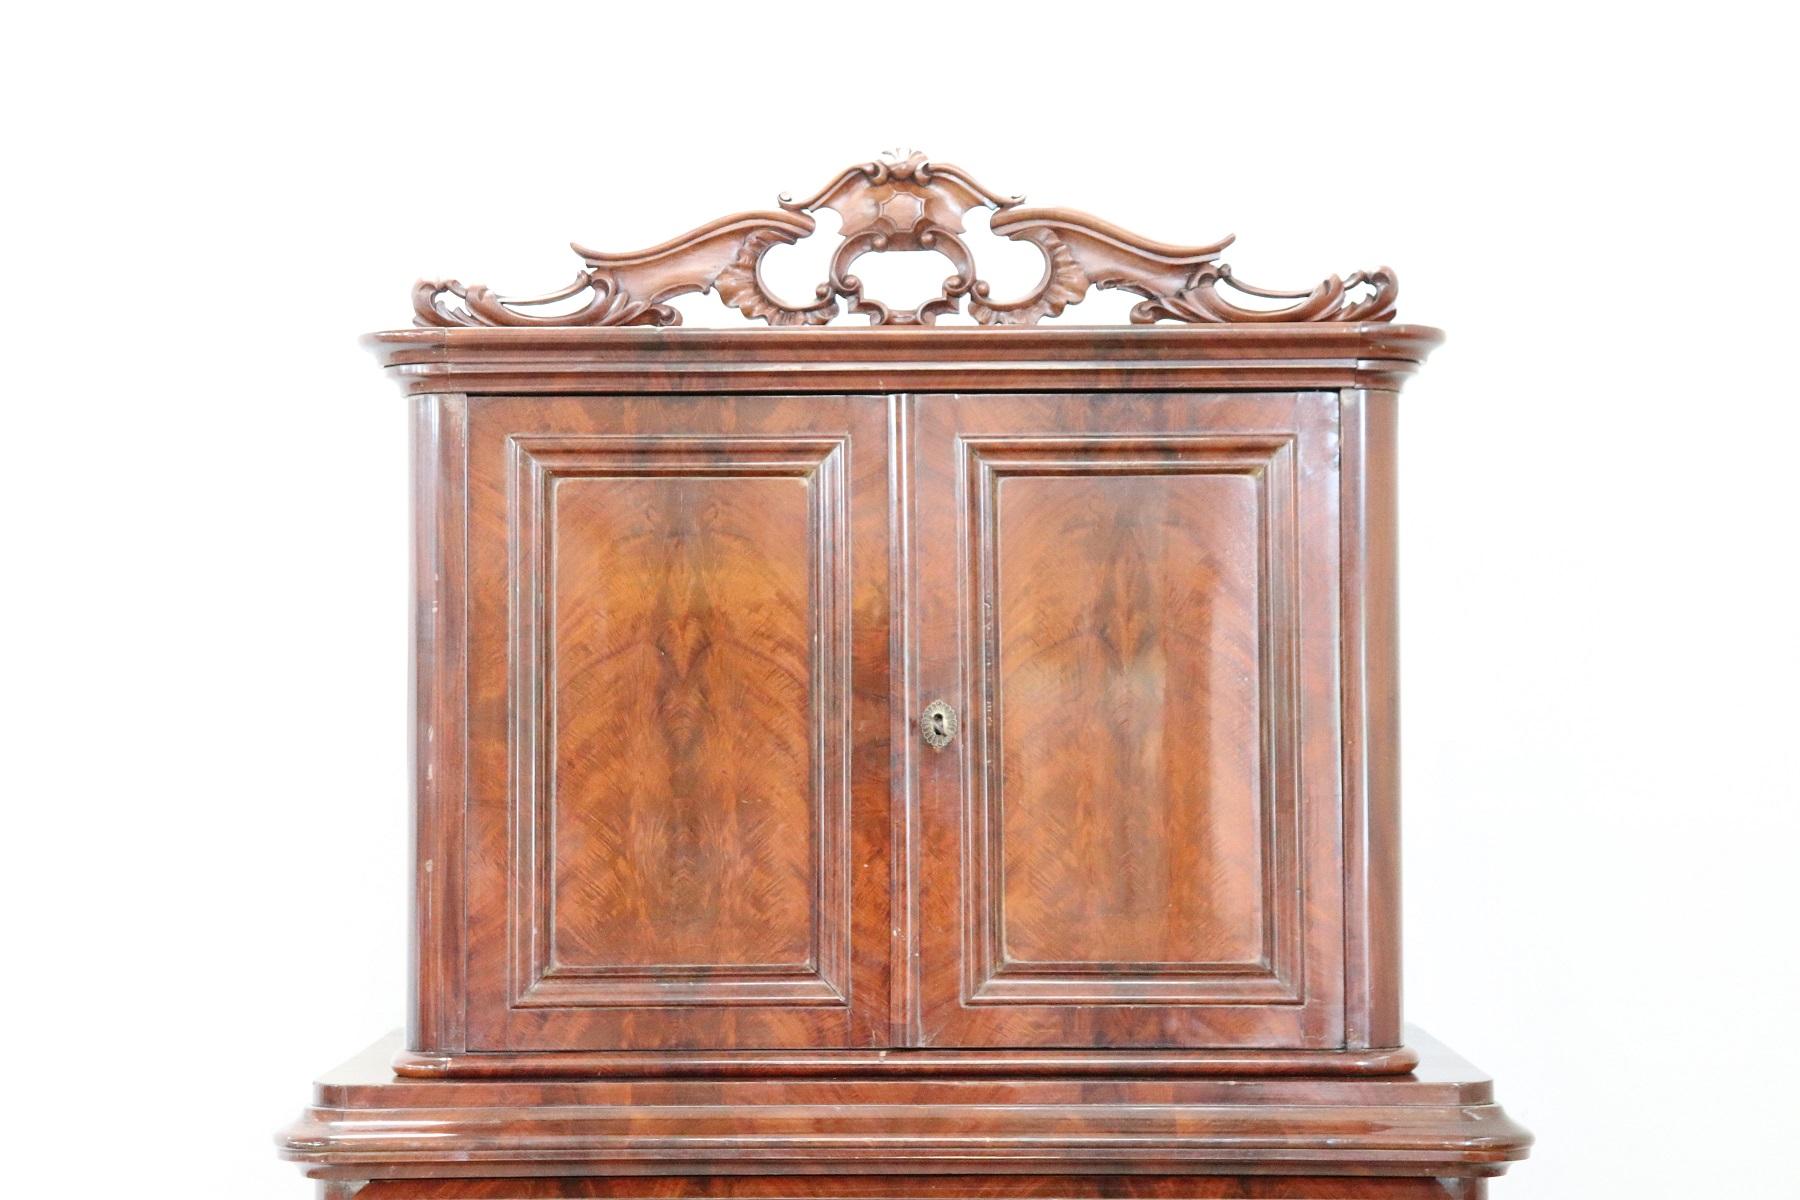 Antique English chest of drawers 1850s in mahogany wood. Very linear and essential with four comfortable drawers. On the front drawers with a particular rounded shape. Above the drawers a comfortable space with two doors. Refined decorative carving